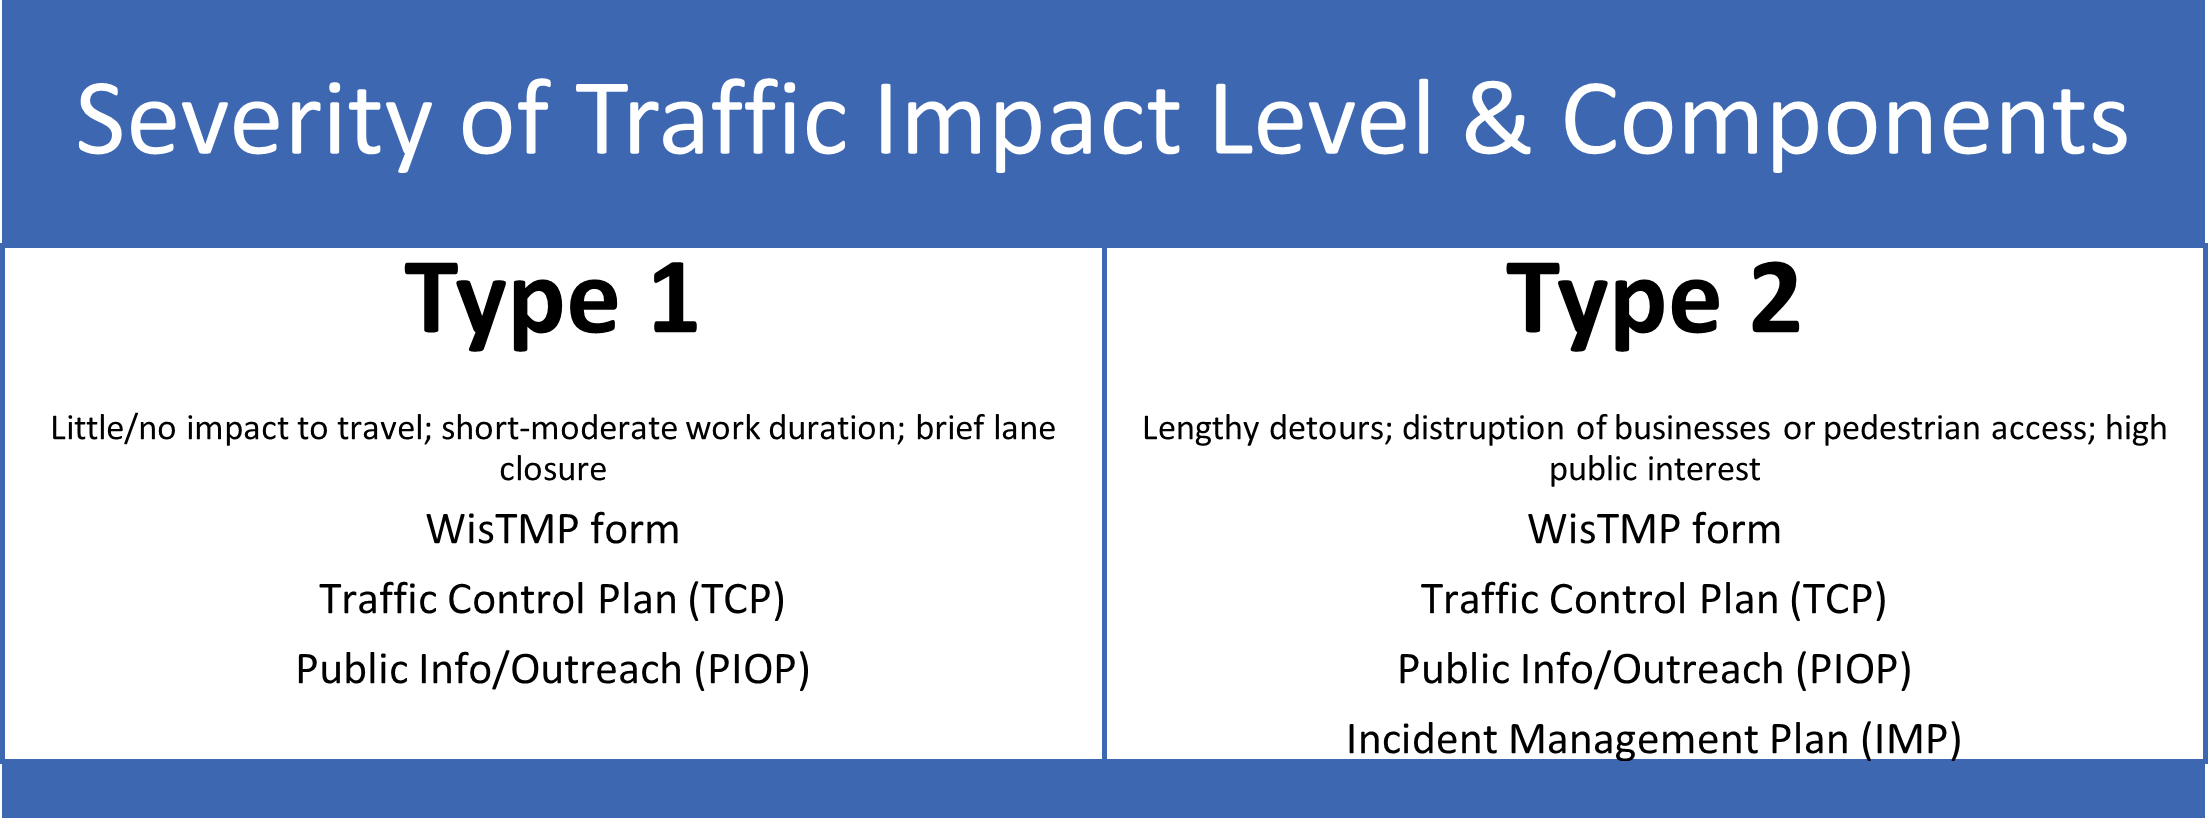 Severity of traffic impact level and components (TMP)